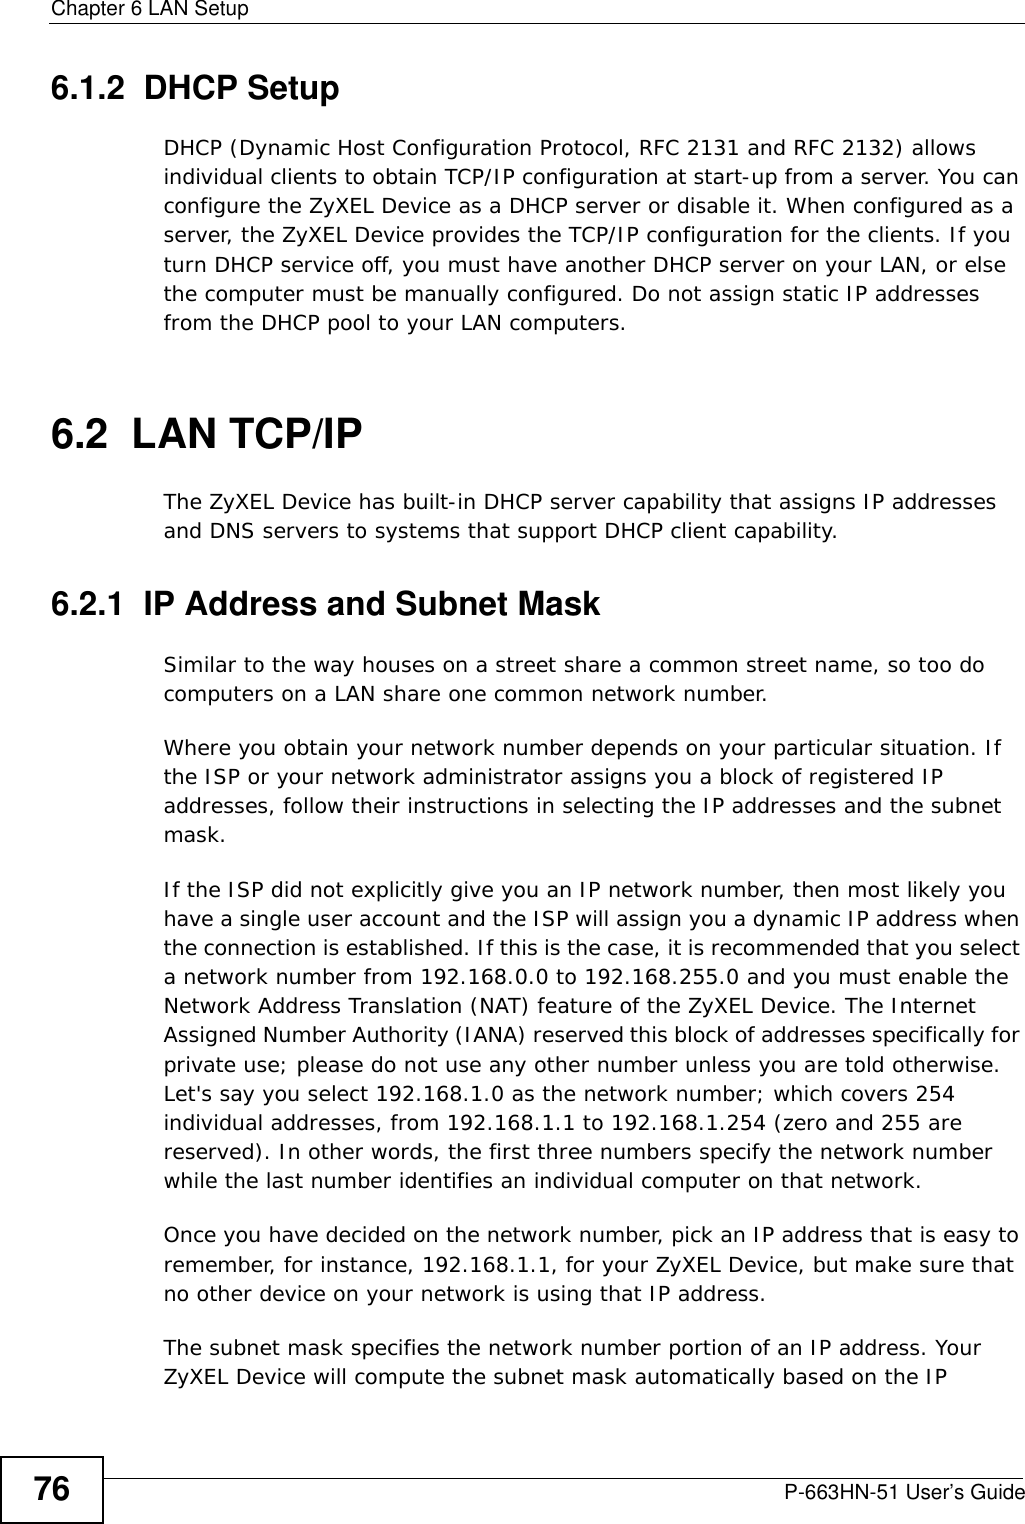 Chapter 6 LAN SetupP-663HN-51 User’s Guide766.1.2  DHCP SetupDHCP (Dynamic Host Configuration Protocol, RFC 2131 and RFC 2132) allows individual clients to obtain TCP/IP configuration at start-up from a server. You can configure the ZyXEL Device as a DHCP server or disable it. When configured as a server, the ZyXEL Device provides the TCP/IP configuration for the clients. If you turn DHCP service off, you must have another DHCP server on your LAN, or else the computer must be manually configured. Do not assign static IP addresses from the DHCP pool to your LAN computers.6.2  LAN TCP/IP The ZyXEL Device has built-in DHCP server capability that assigns IP addresses and DNS servers to systems that support DHCP client capability.6.2.1  IP Address and Subnet MaskSimilar to the way houses on a street share a common street name, so too do computers on a LAN share one common network number.Where you obtain your network number depends on your particular situation. If the ISP or your network administrator assigns you a block of registered IP addresses, follow their instructions in selecting the IP addresses and the subnet mask.If the ISP did not explicitly give you an IP network number, then most likely you have a single user account and the ISP will assign you a dynamic IP address when the connection is established. If this is the case, it is recommended that you select a network number from 192.168.0.0 to 192.168.255.0 and you must enable the Network Address Translation (NAT) feature of the ZyXEL Device. The Internet Assigned Number Authority (IANA) reserved this block of addresses specifically for private use; please do not use any other number unless you are told otherwise. Let&apos;s say you select 192.168.1.0 as the network number; which covers 254 individual addresses, from 192.168.1.1 to 192.168.1.254 (zero and 255 are reserved). In other words, the first three numbers specify the network number while the last number identifies an individual computer on that network.Once you have decided on the network number, pick an IP address that is easy to remember, for instance, 192.168.1.1, for your ZyXEL Device, but make sure that no other device on your network is using that IP address.The subnet mask specifies the network number portion of an IP address. Your ZyXEL Device will compute the subnet mask automatically based on the IP 